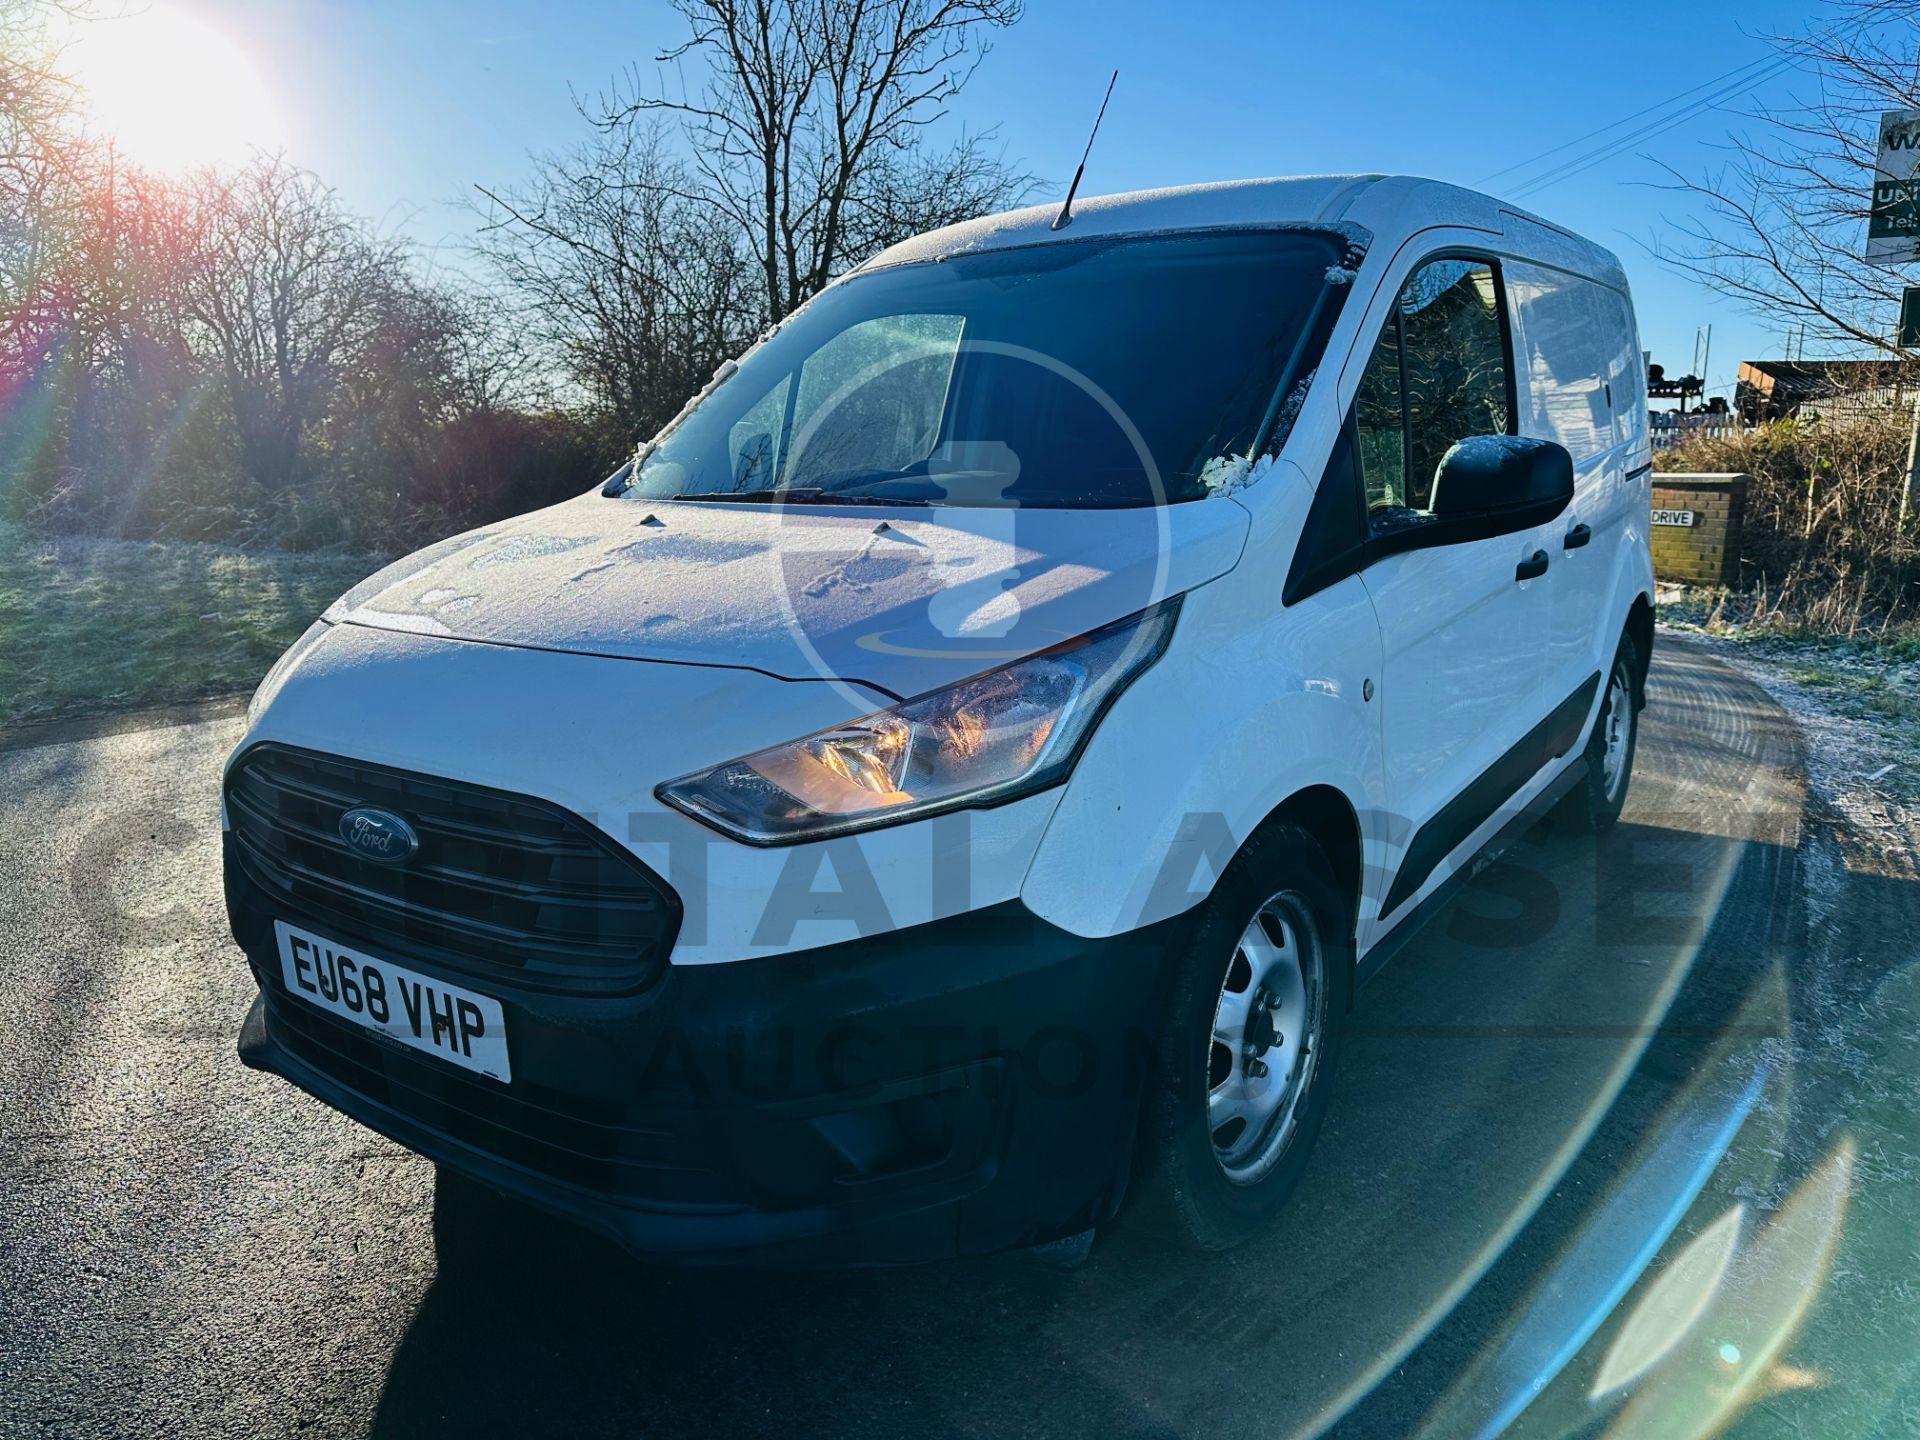 FORD TRANSIT CONNECT 1.5TDCI - 5 SEATER CREW VAN - 2019 MODEL - 1 OWNER FROM NEW - ULEZ COMPLIANT! - Image 4 of 32